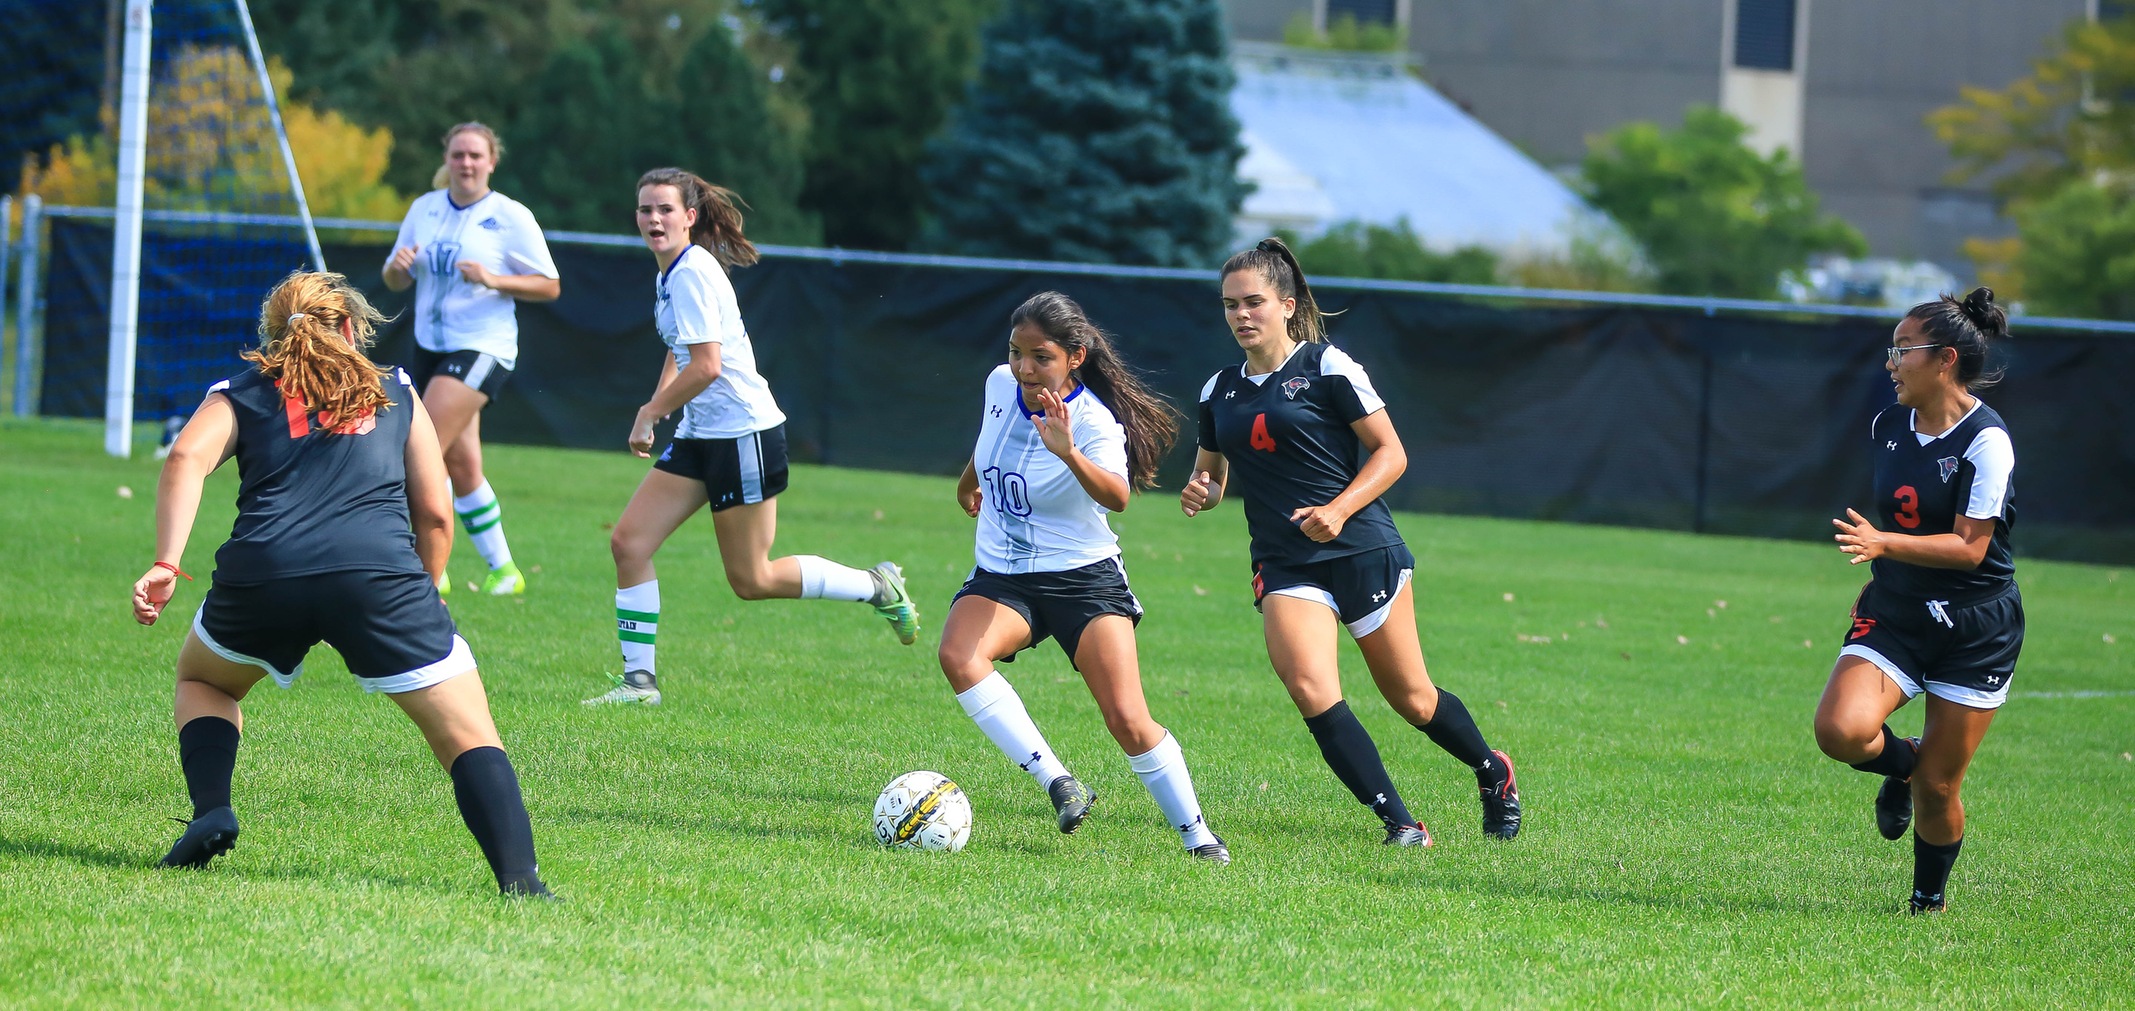 Women’s soccer team finished the season with a 9-9 record